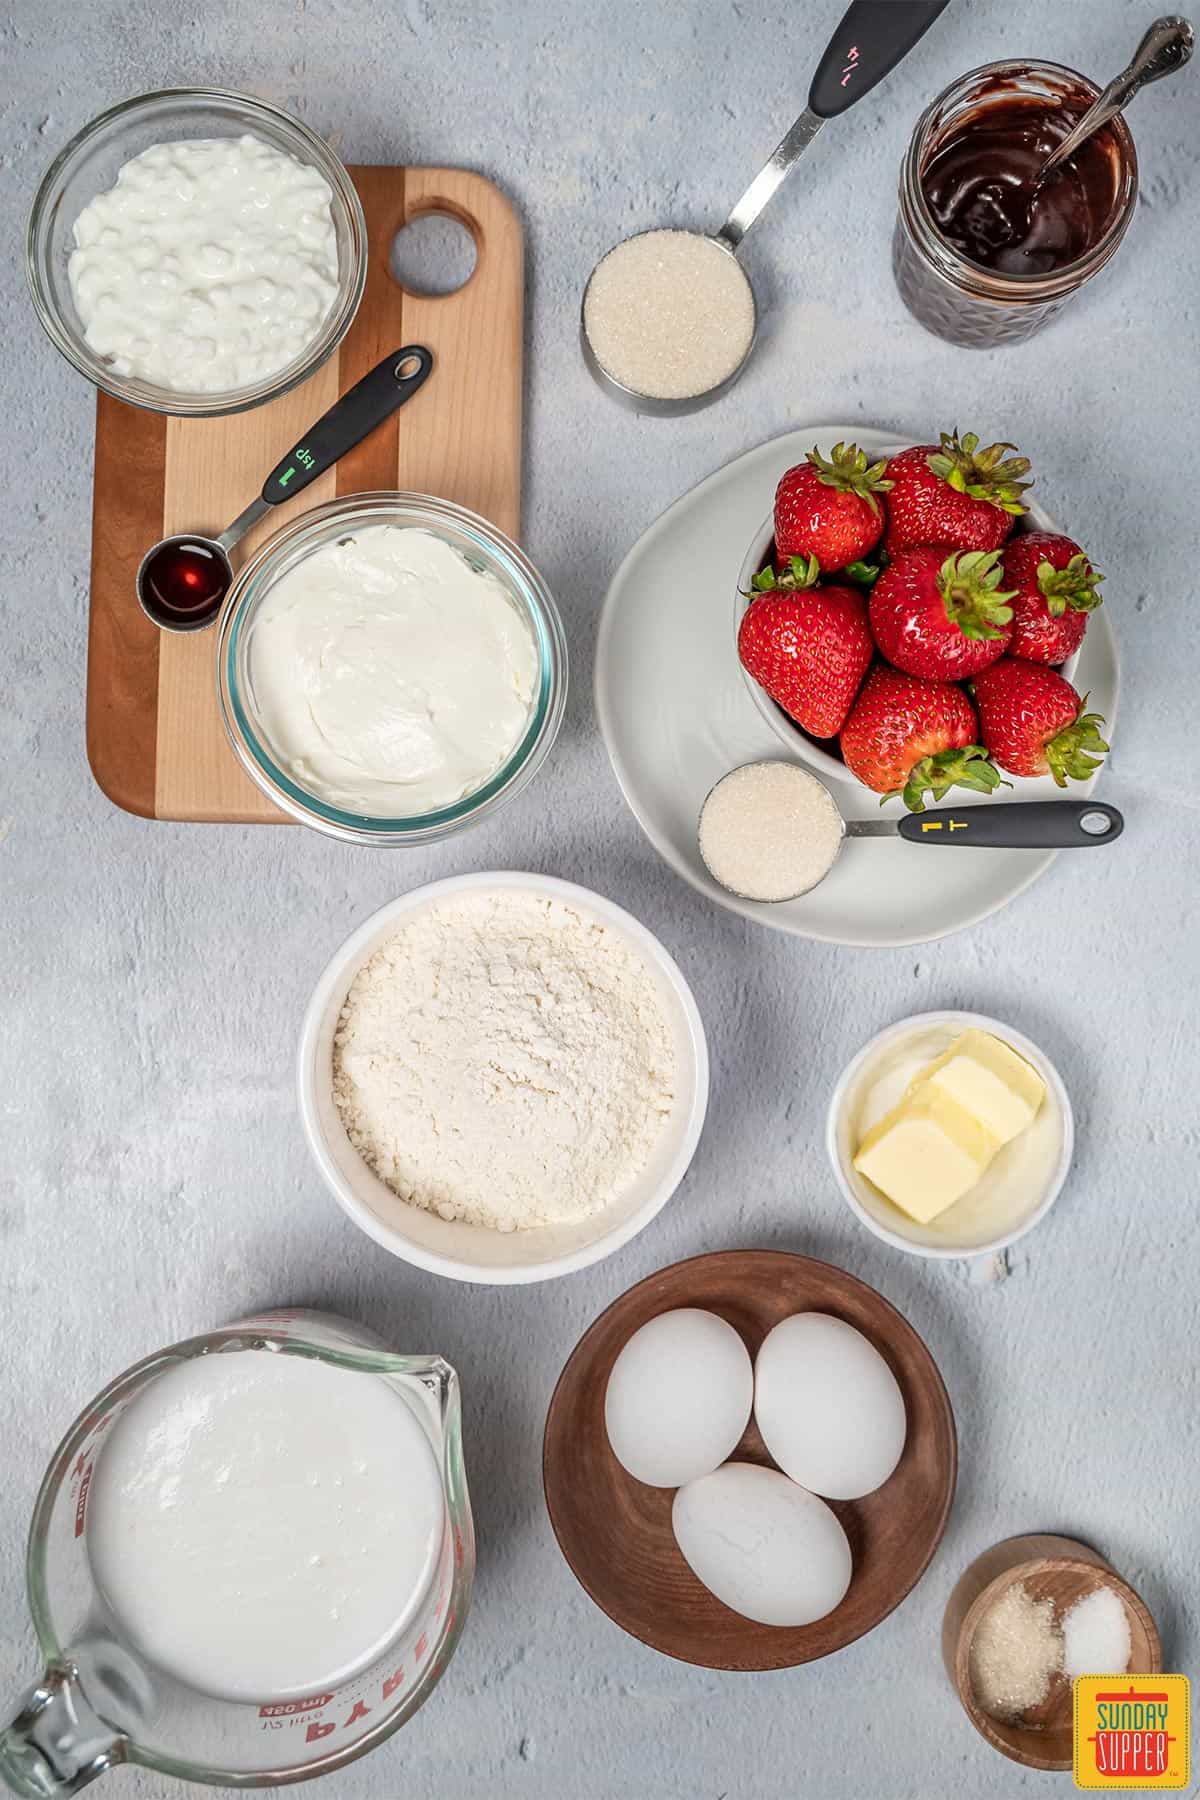 Ingredients to make strawberry crepes